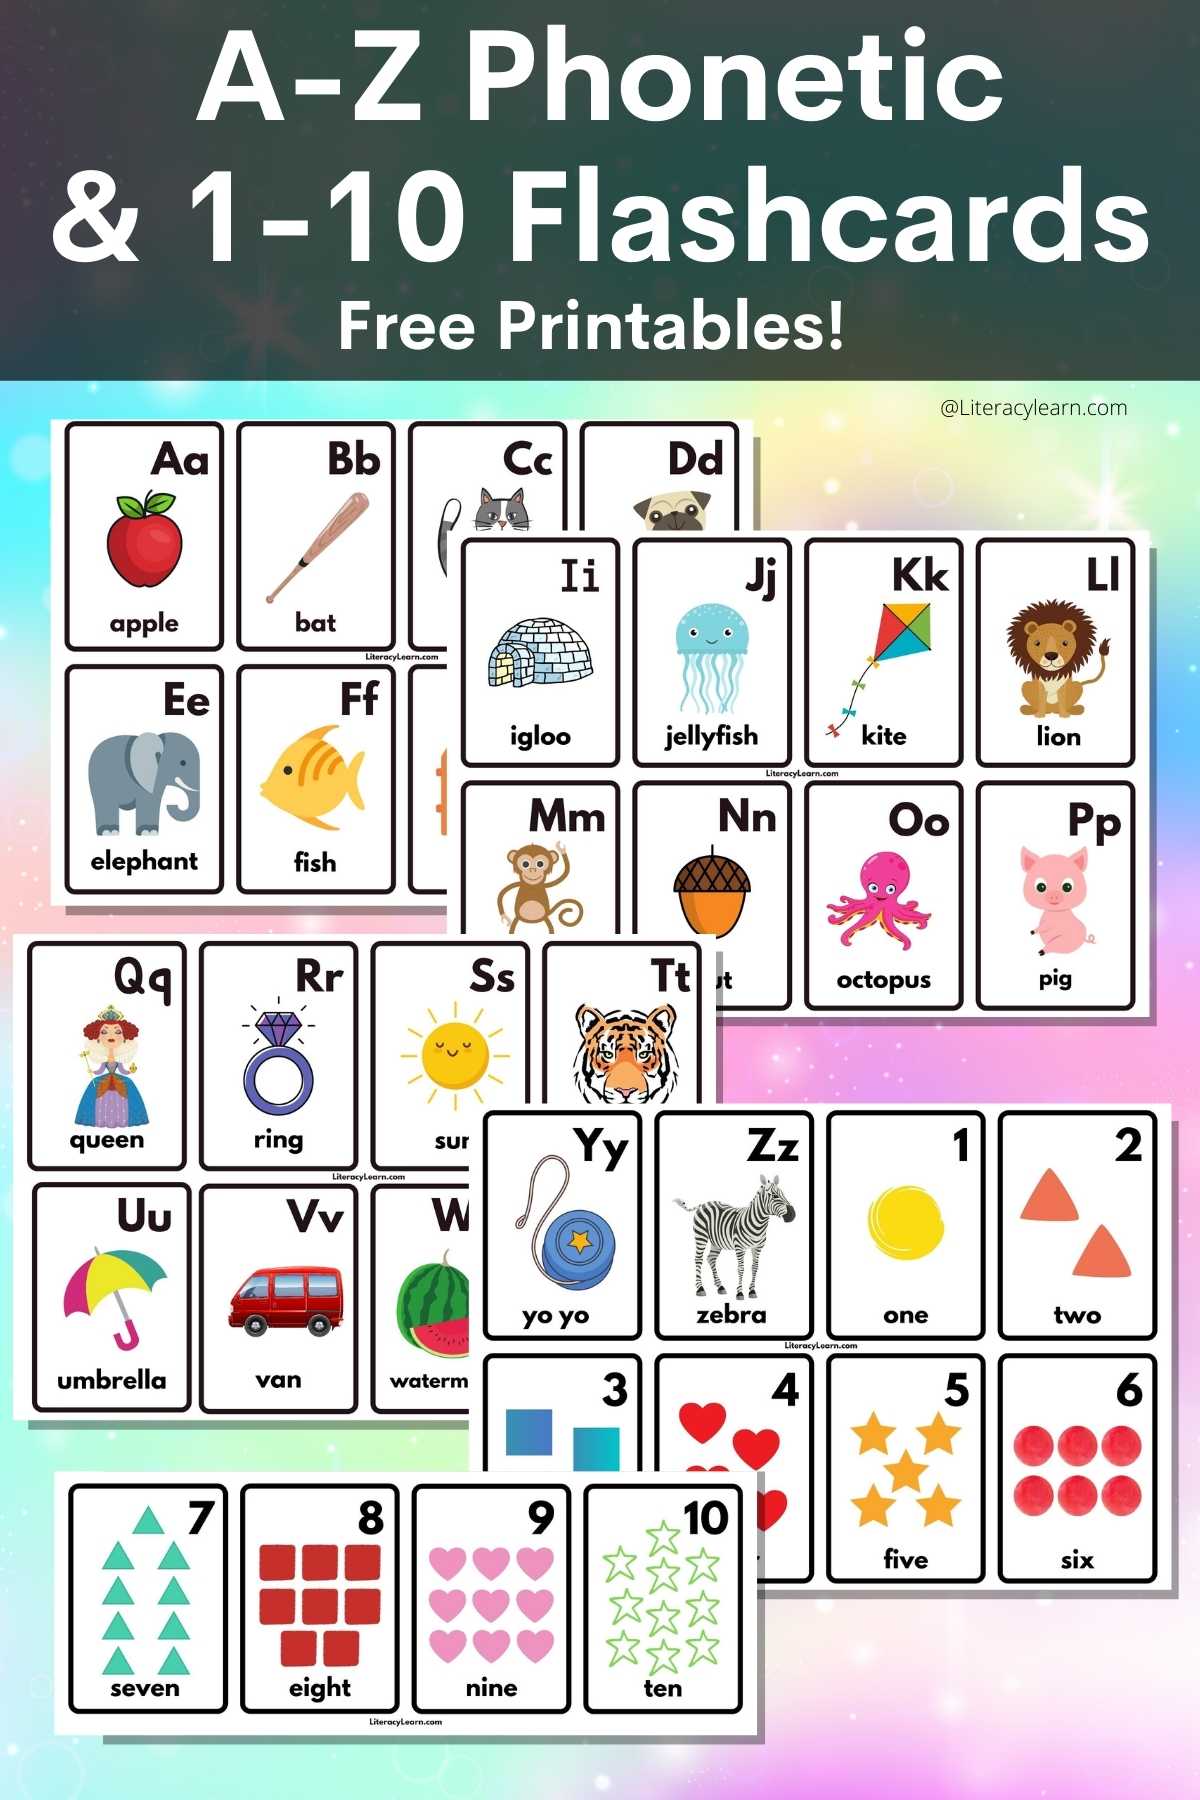 Colorful graphic of the printed flashcards with the words "A-Z Phonetic and 1-10 Flashcards."